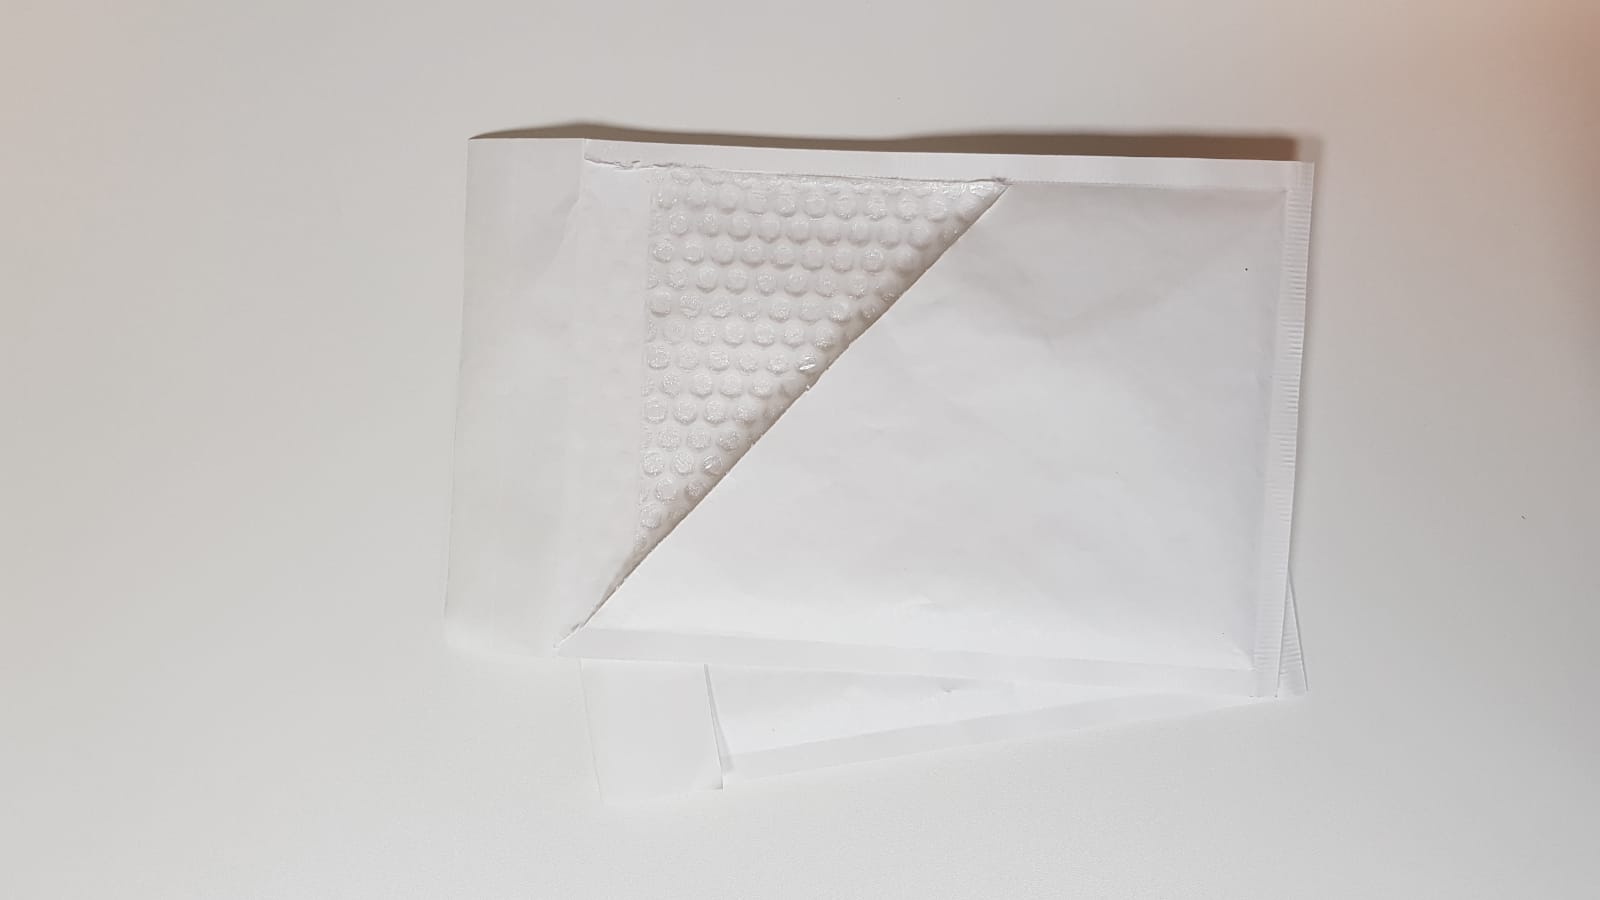 Padded bag 300 X 440mm (and various sizes) - Airship White Peel & Seal Padded Bags